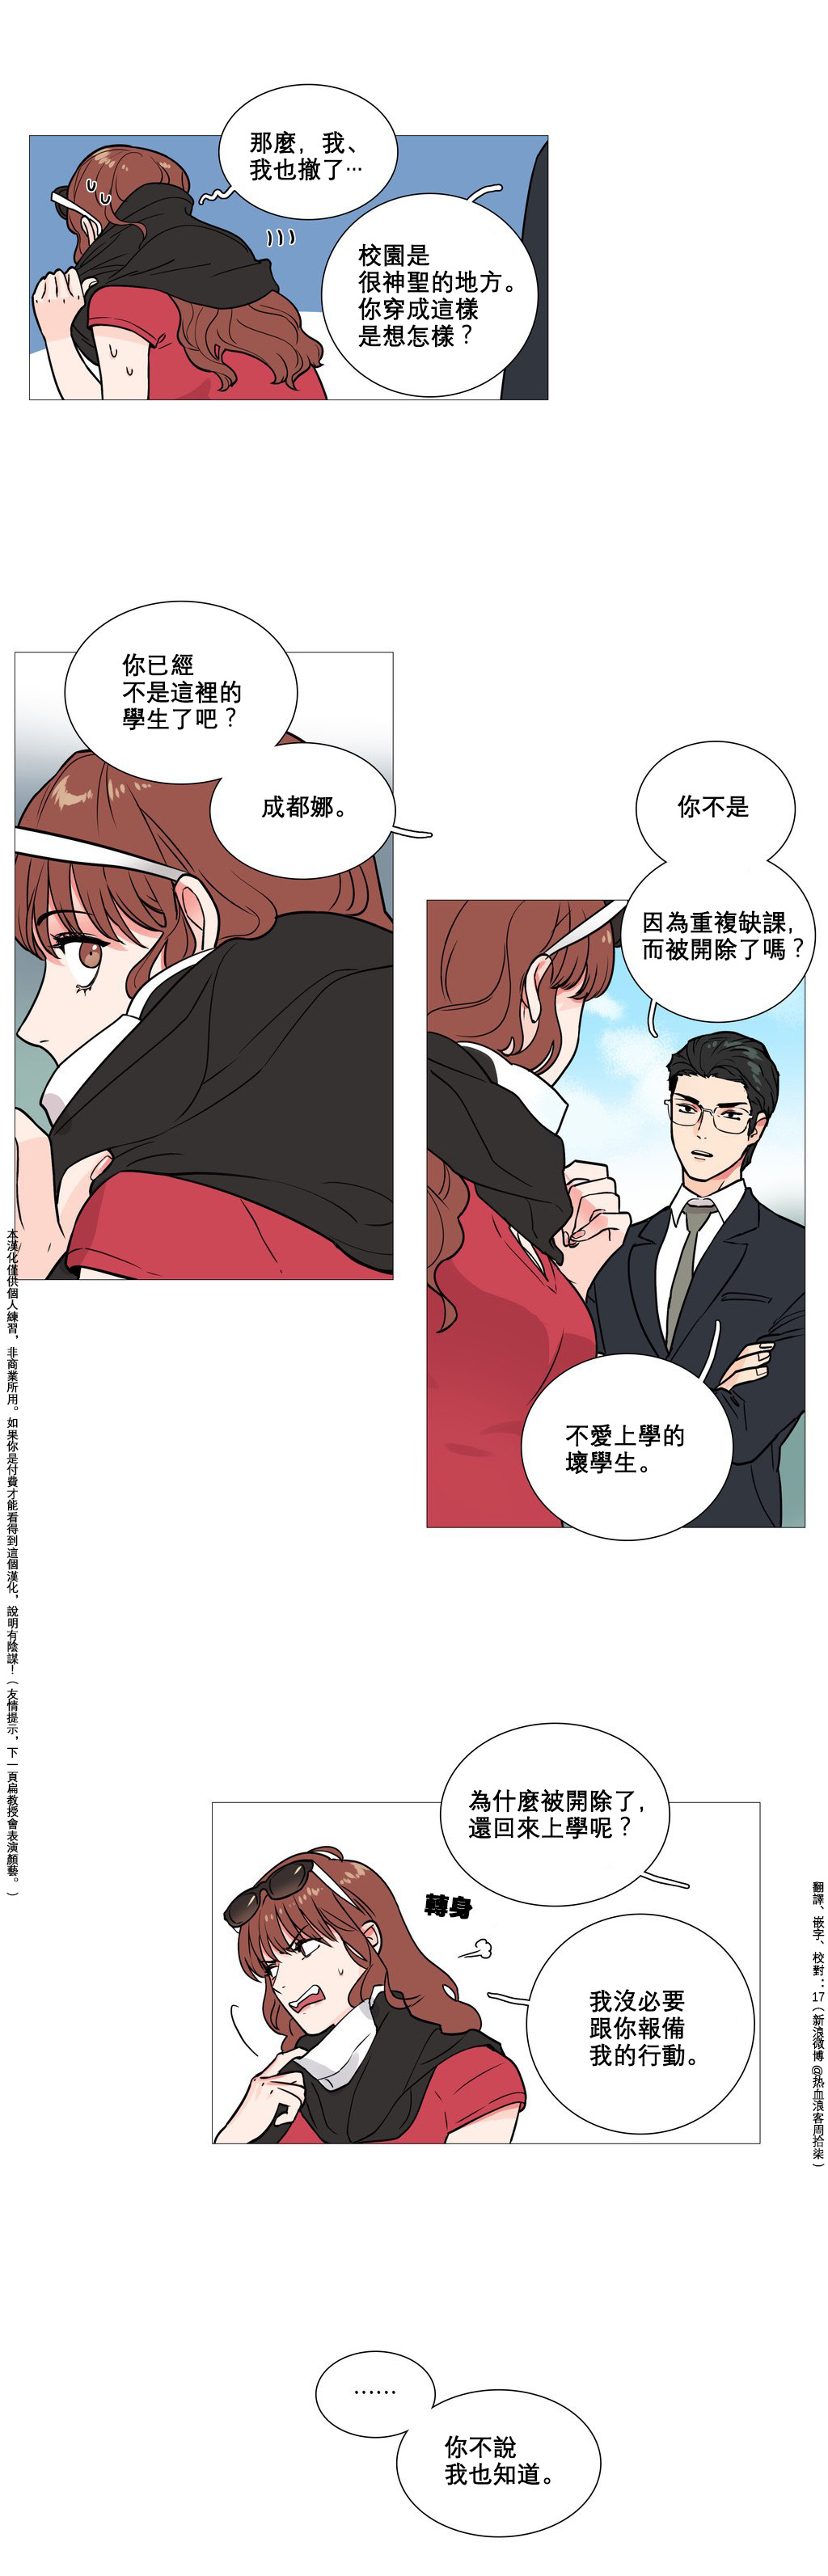 [The Jinshan] Sadistic Beauty Ch.1-25 [Chinese] [17汉化] page 44 full